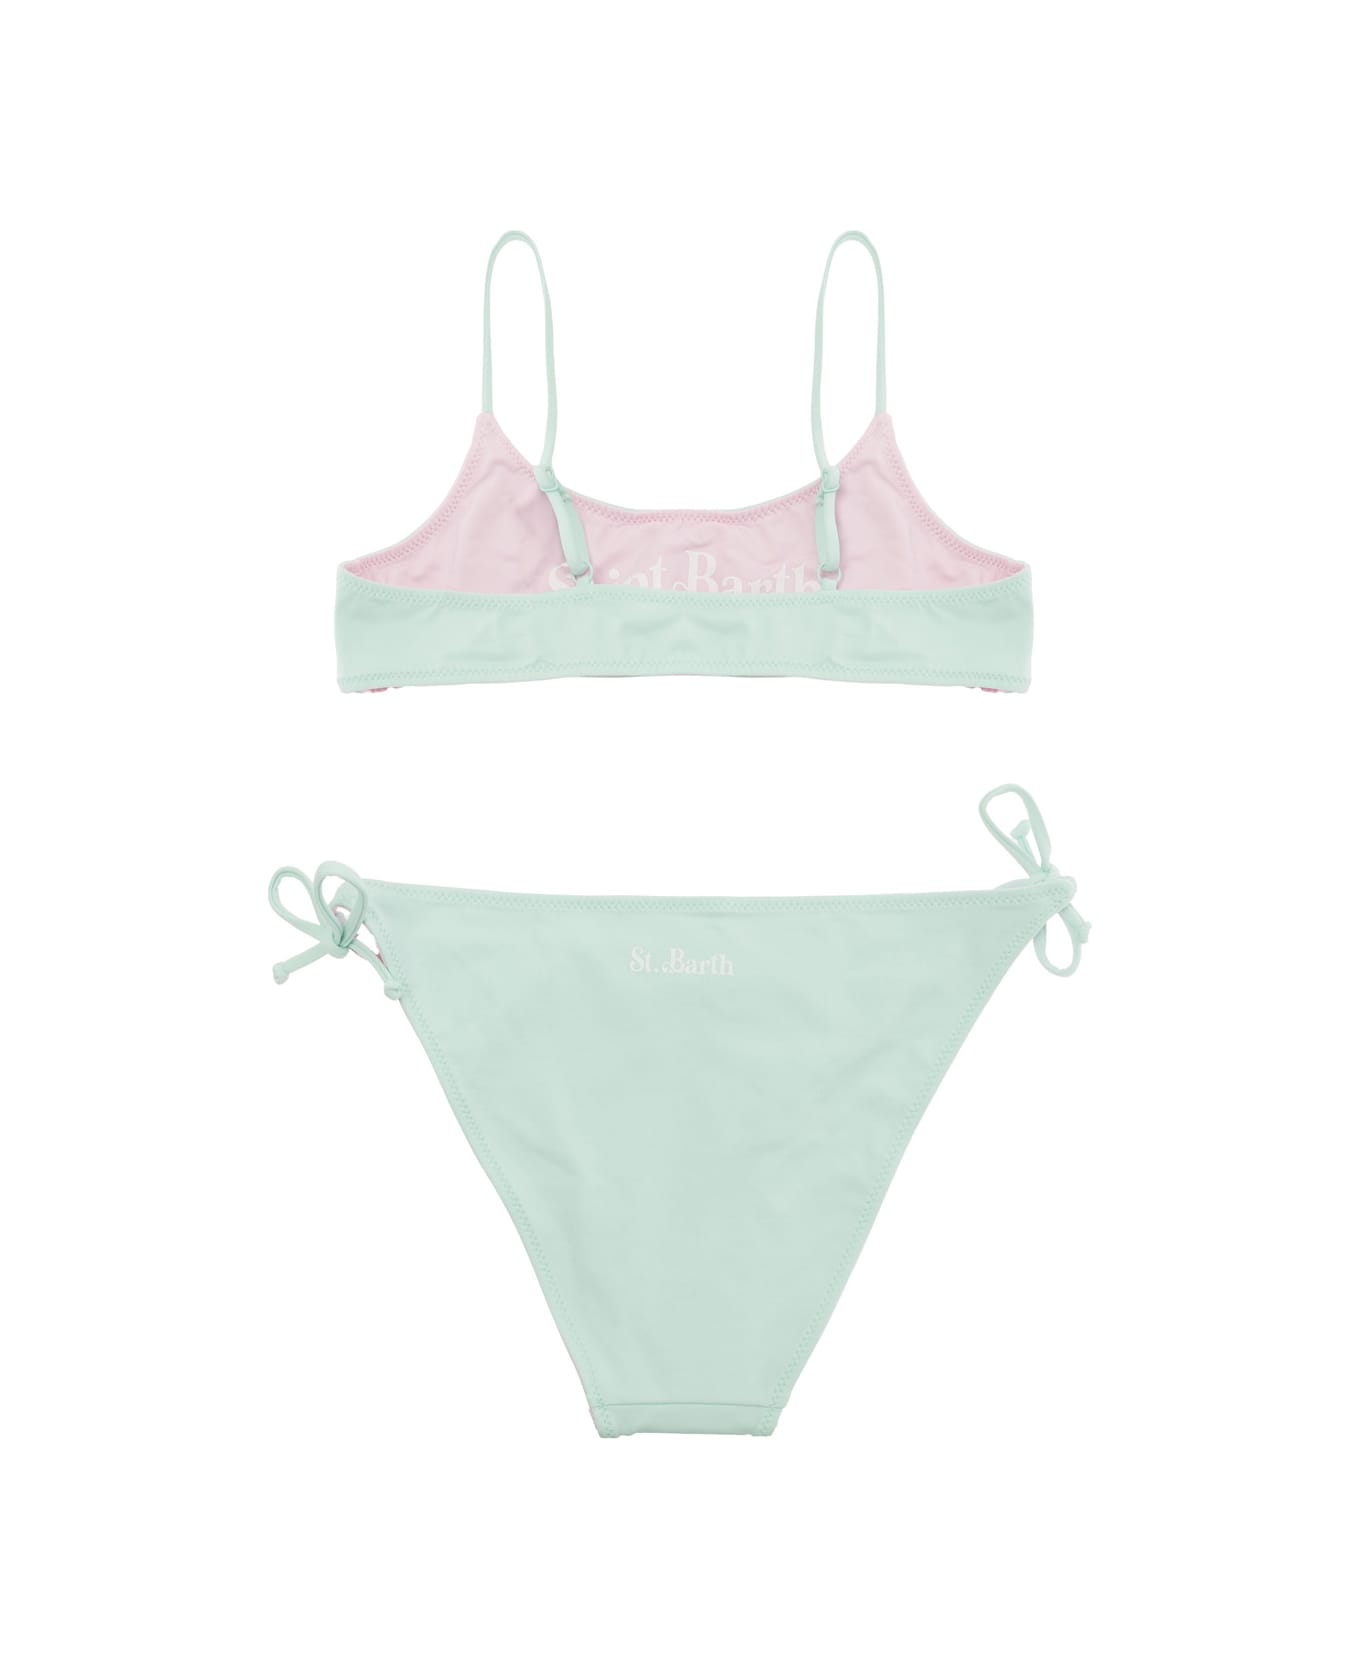 MC2 Saint Barth 'jaiden' Pink And Mint Reversible Bikini With Logo Lettering In Stretch Fabric Girl - Multicolor